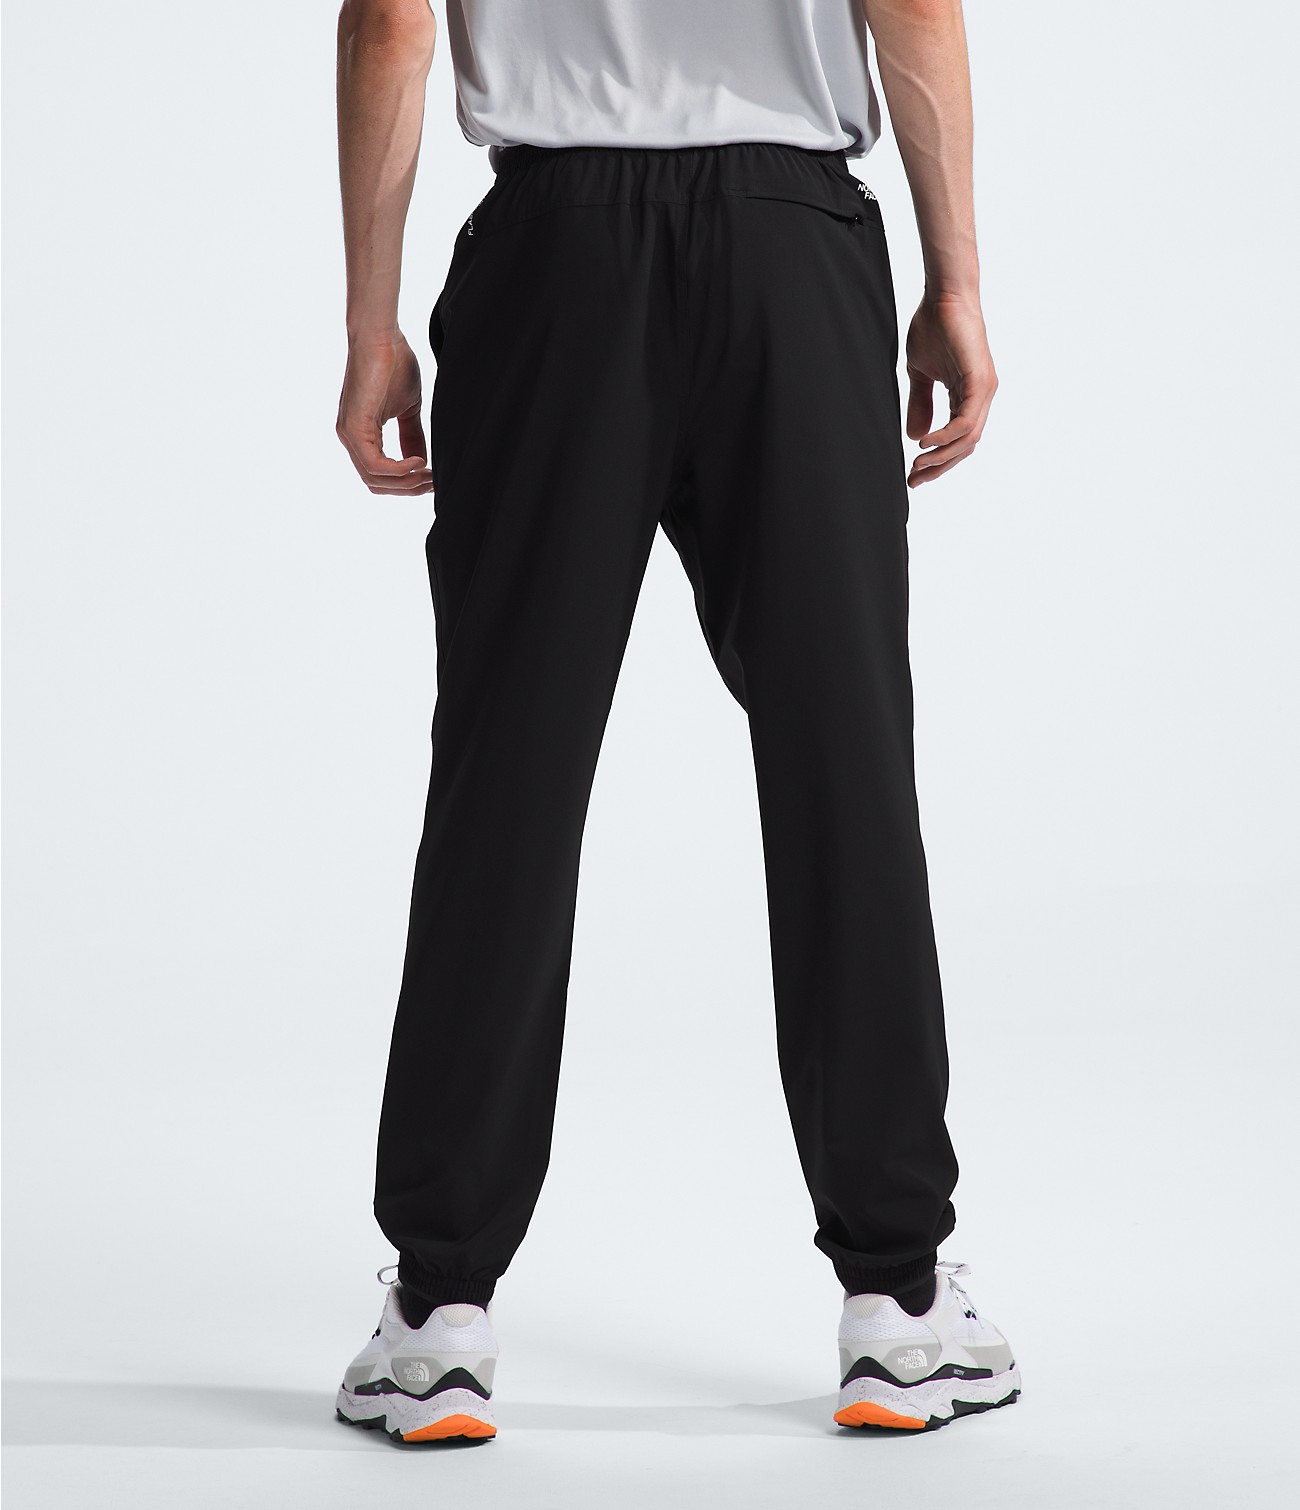 Men’s Wander Joggers 2.0 | The North Face